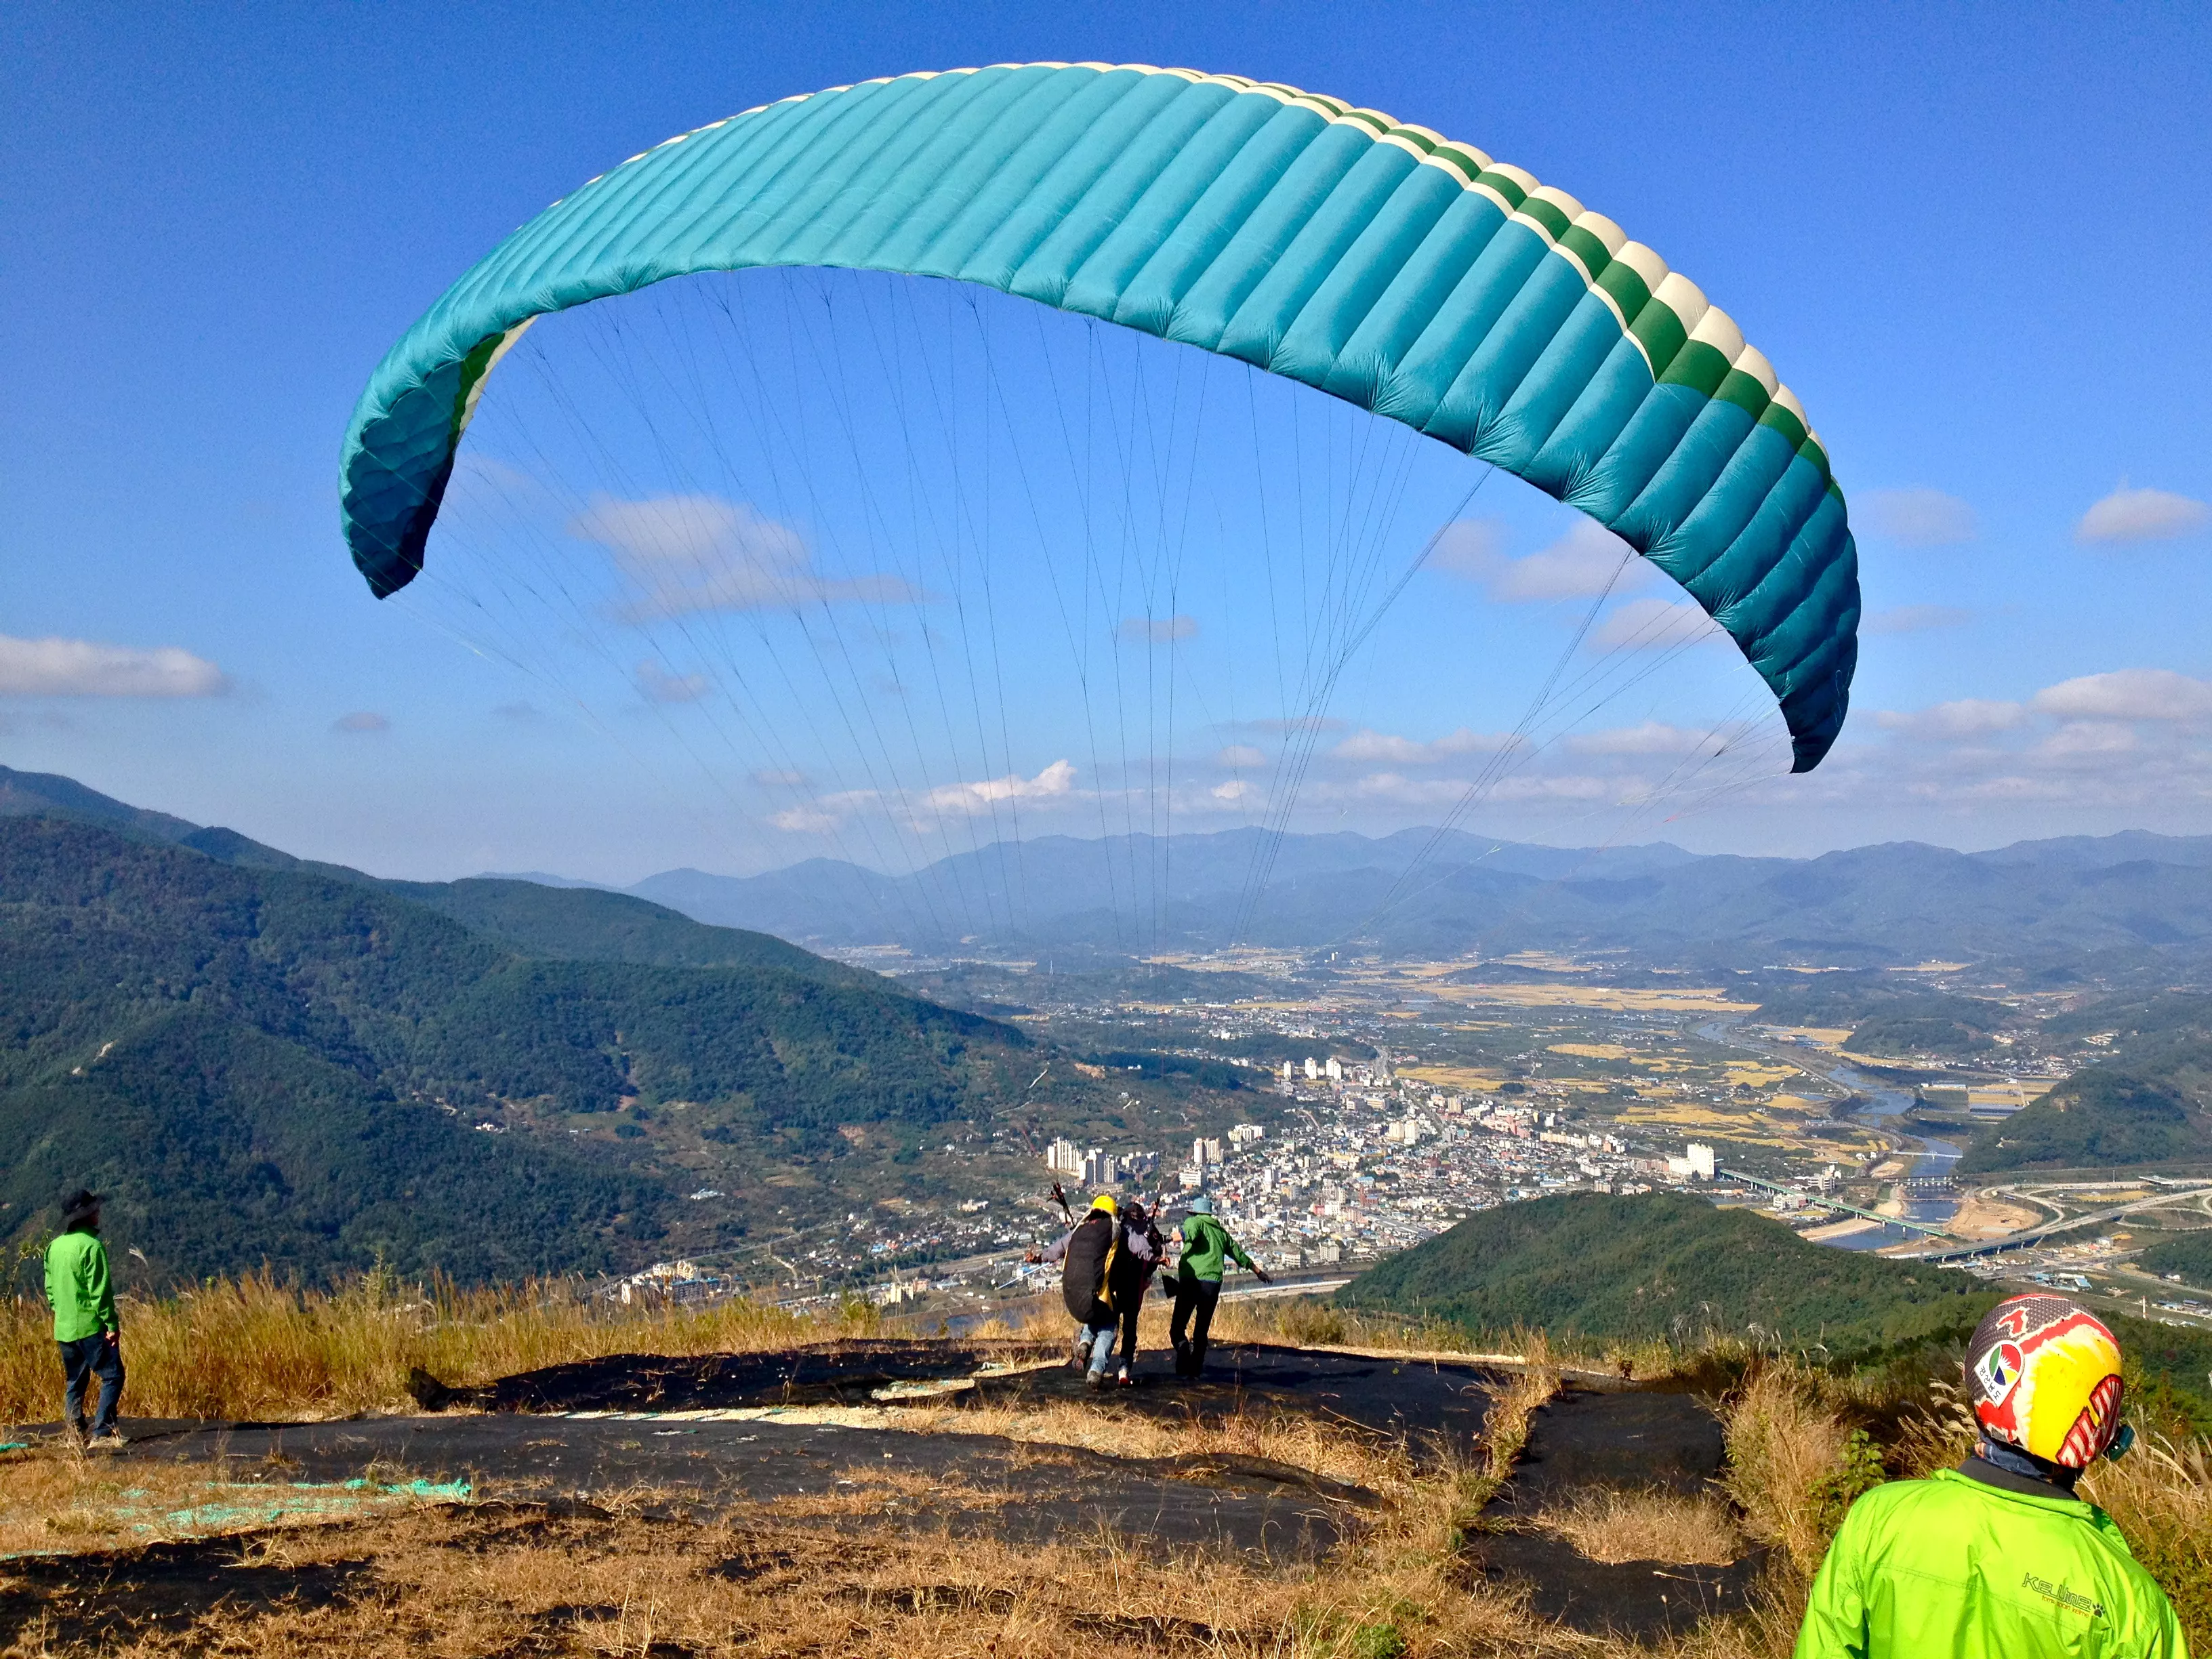 Paragliding Korea in South Korea, East Asia | Paragliding - Rated 1